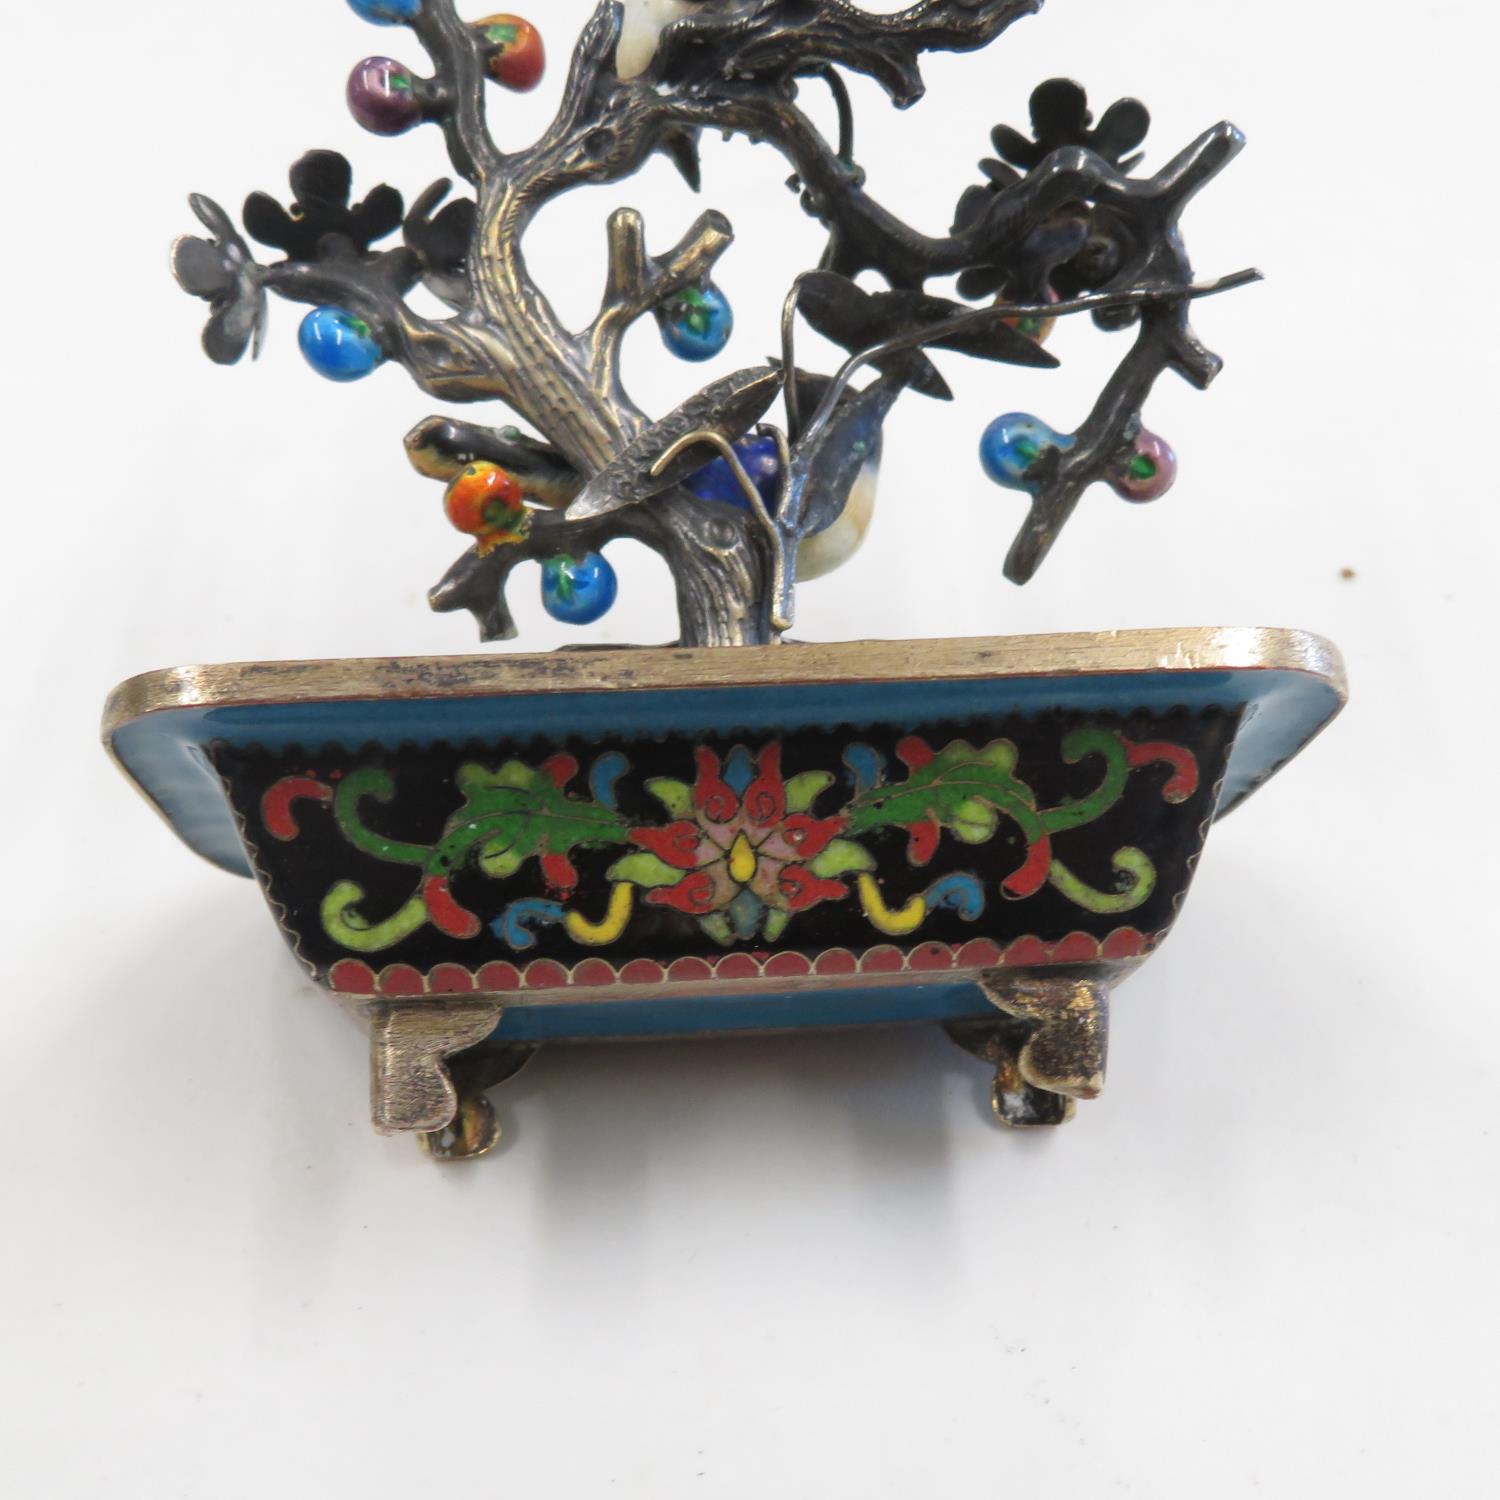 4" high x 3" wide silver cloissone enamelled bowl with bonsai tree and enamelled flowers with 2x sil - Image 4 of 4